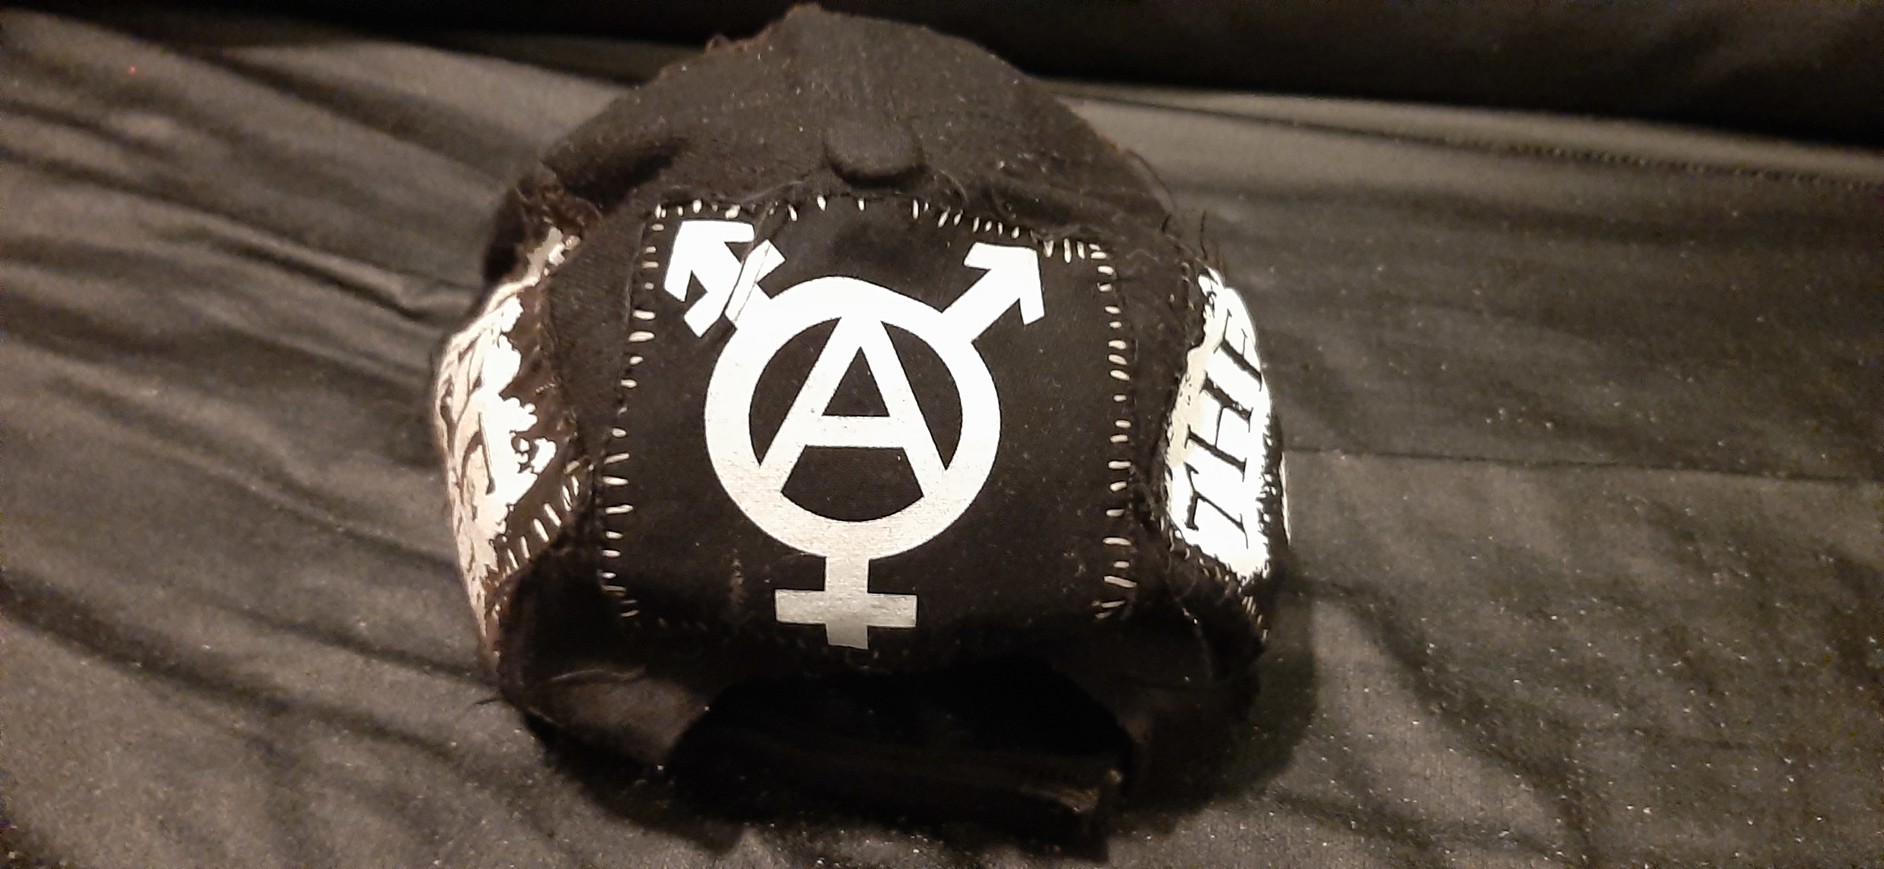 back of my DIY'd black gender terrorist hat, which is the tranarchy symbol patch'